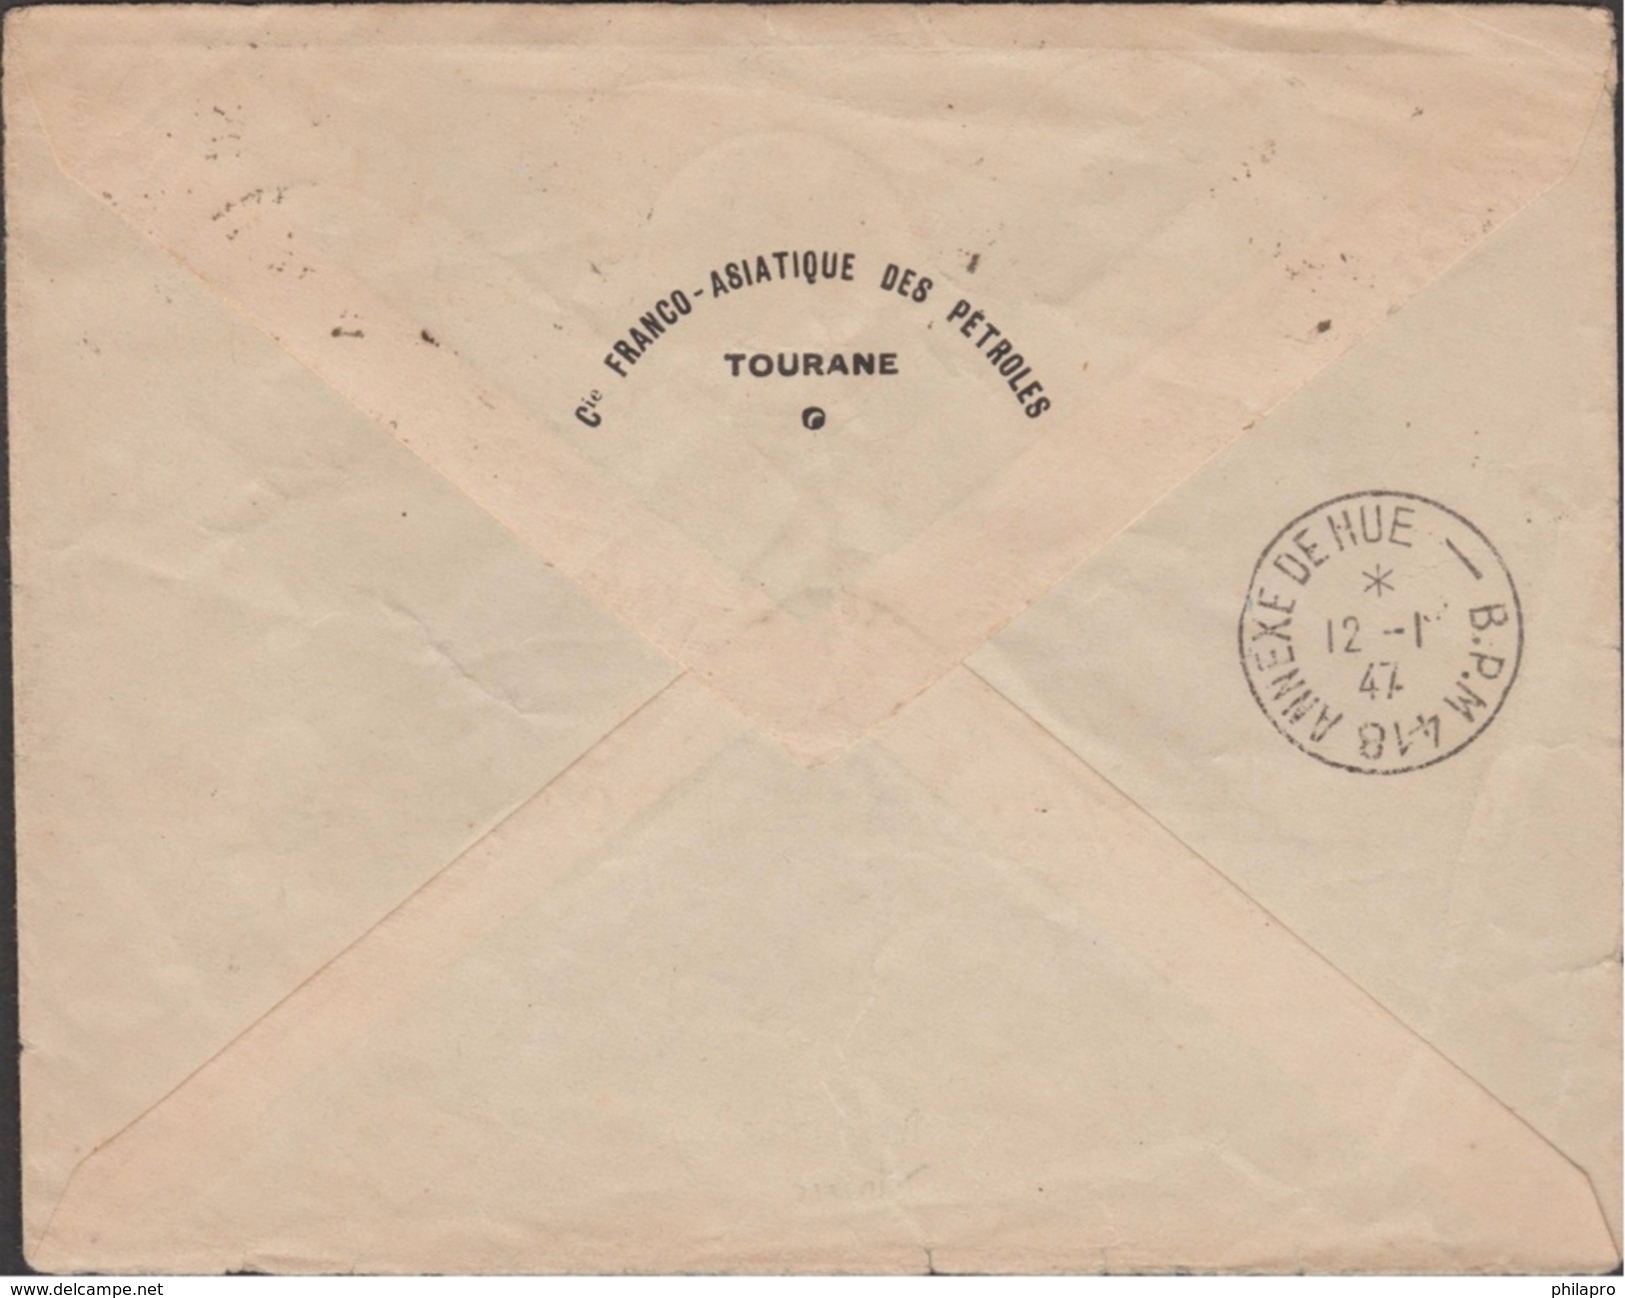 INDOCHINE COVER  From TOURANE BUU DIEN CUC 1947  To  ANNEXE DE HUE  BPM418  FRENCH STAMPS   Réf G524  RARE - Lettres & Documents